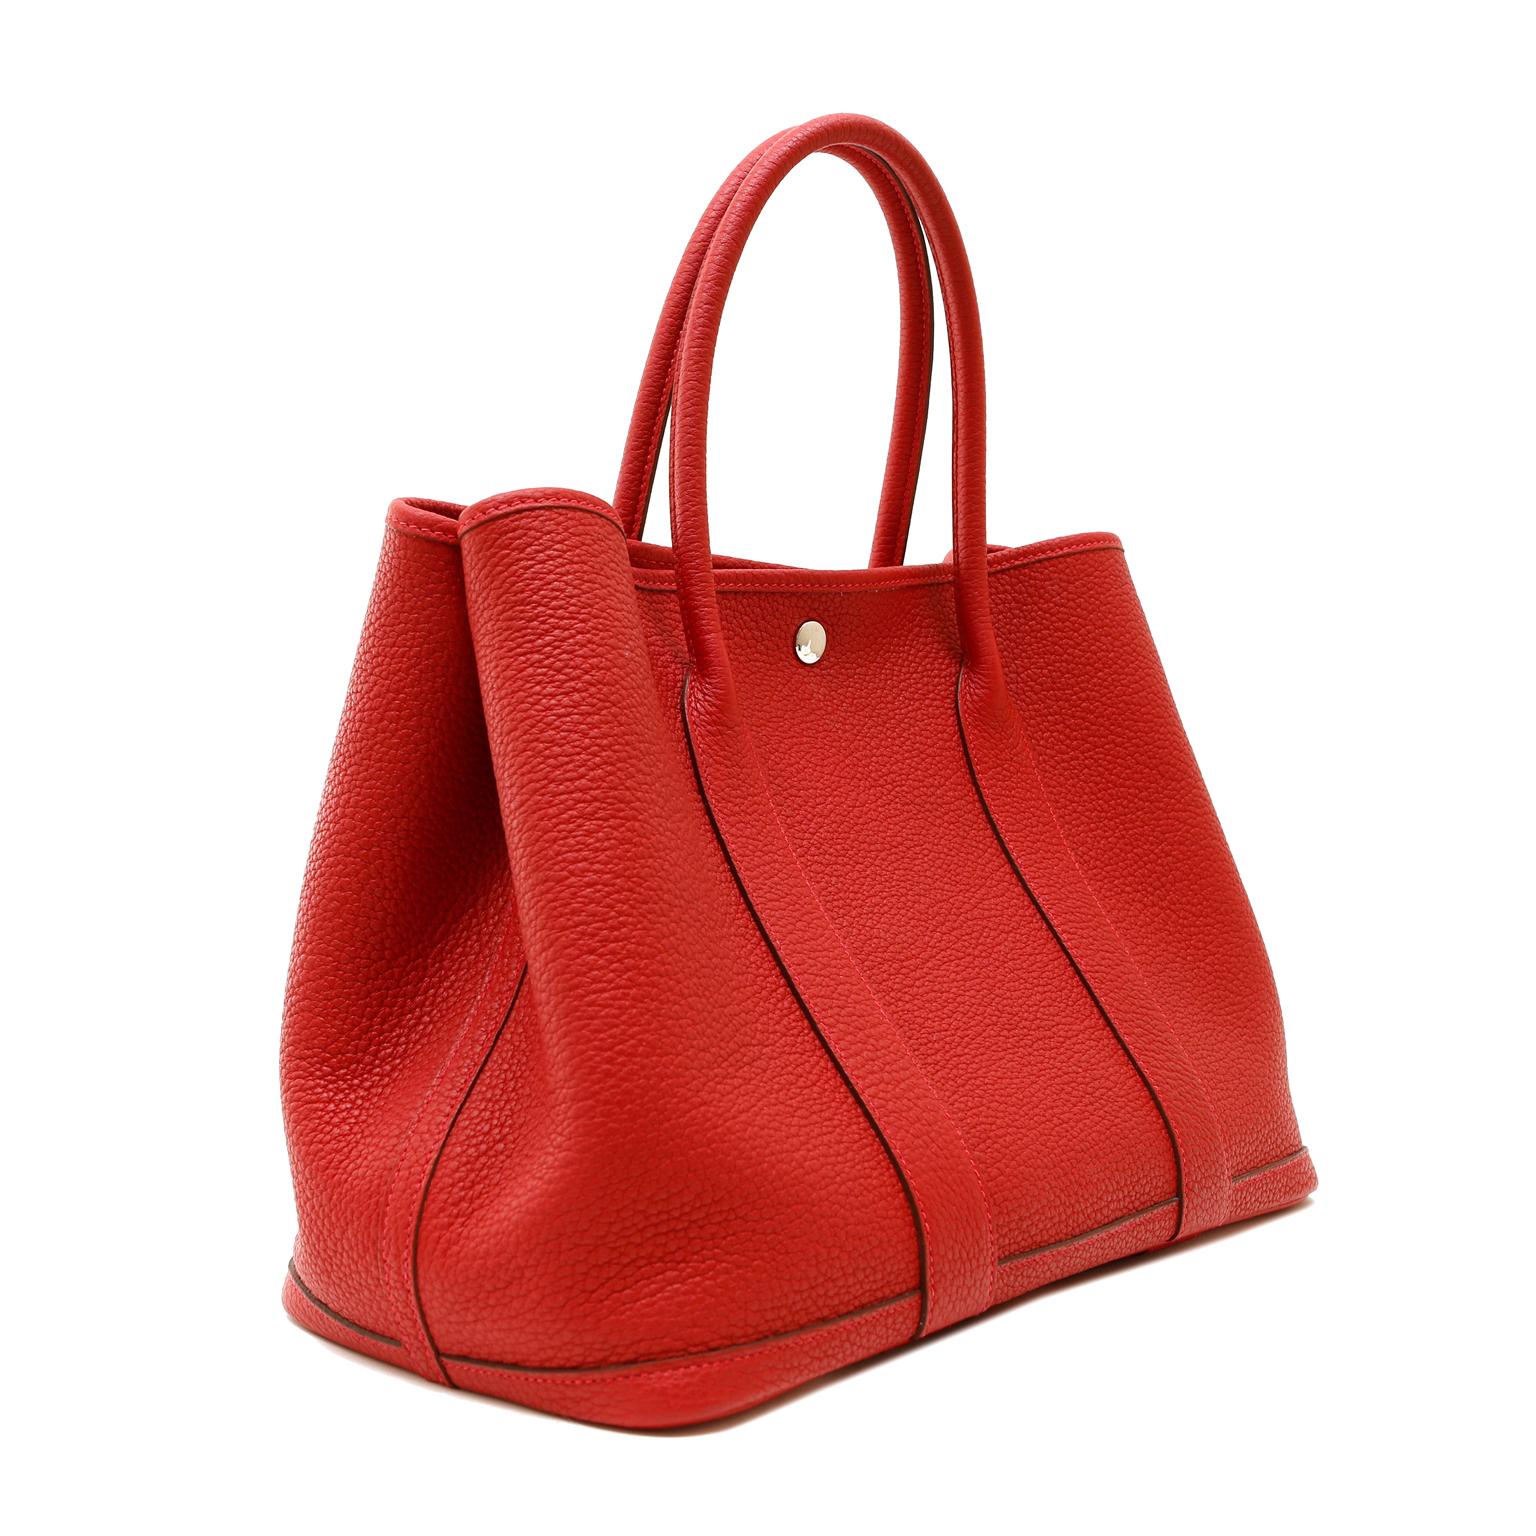 This authentic Hermès Red Negonda Leather Garden Party GM Tote is in pristine condition.   Perfectly scaled for everyday, the Garden Party easily carries everything in high style.  
Vivid lipstick red Negonda leather is textured and durable with a